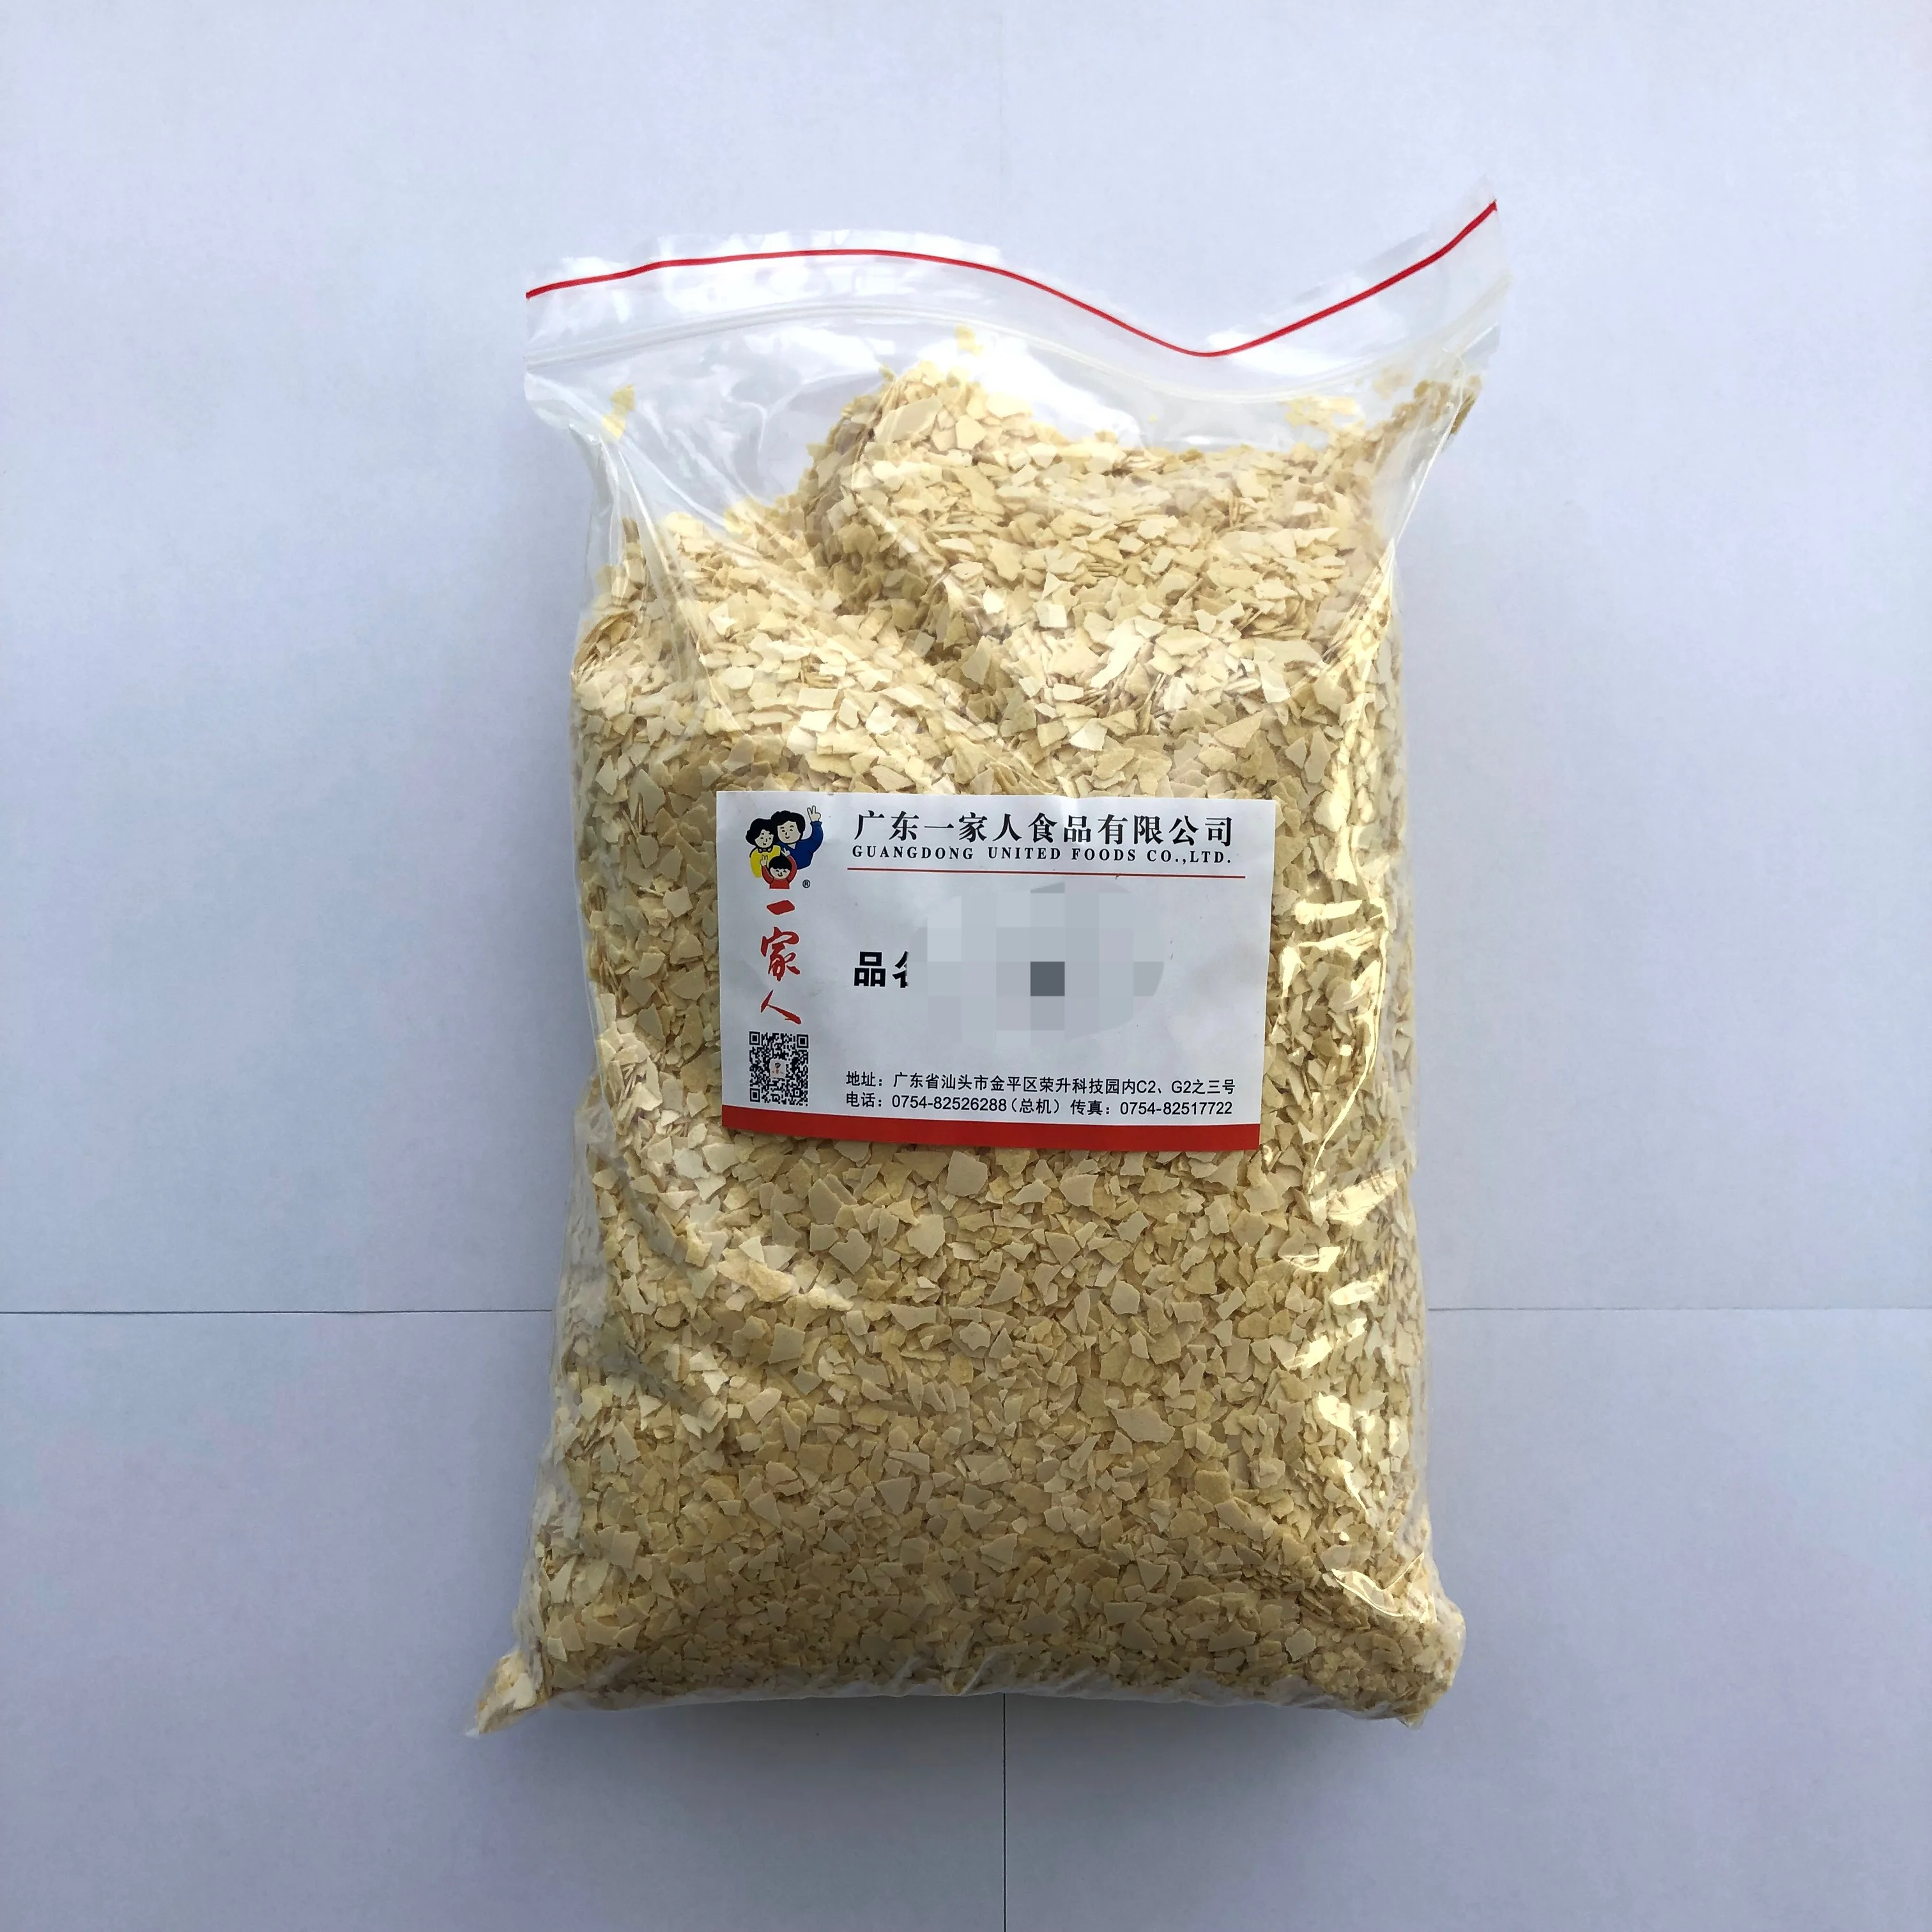 
SAMPLE ONLY  T2 Cereal Flake  (62206939501)